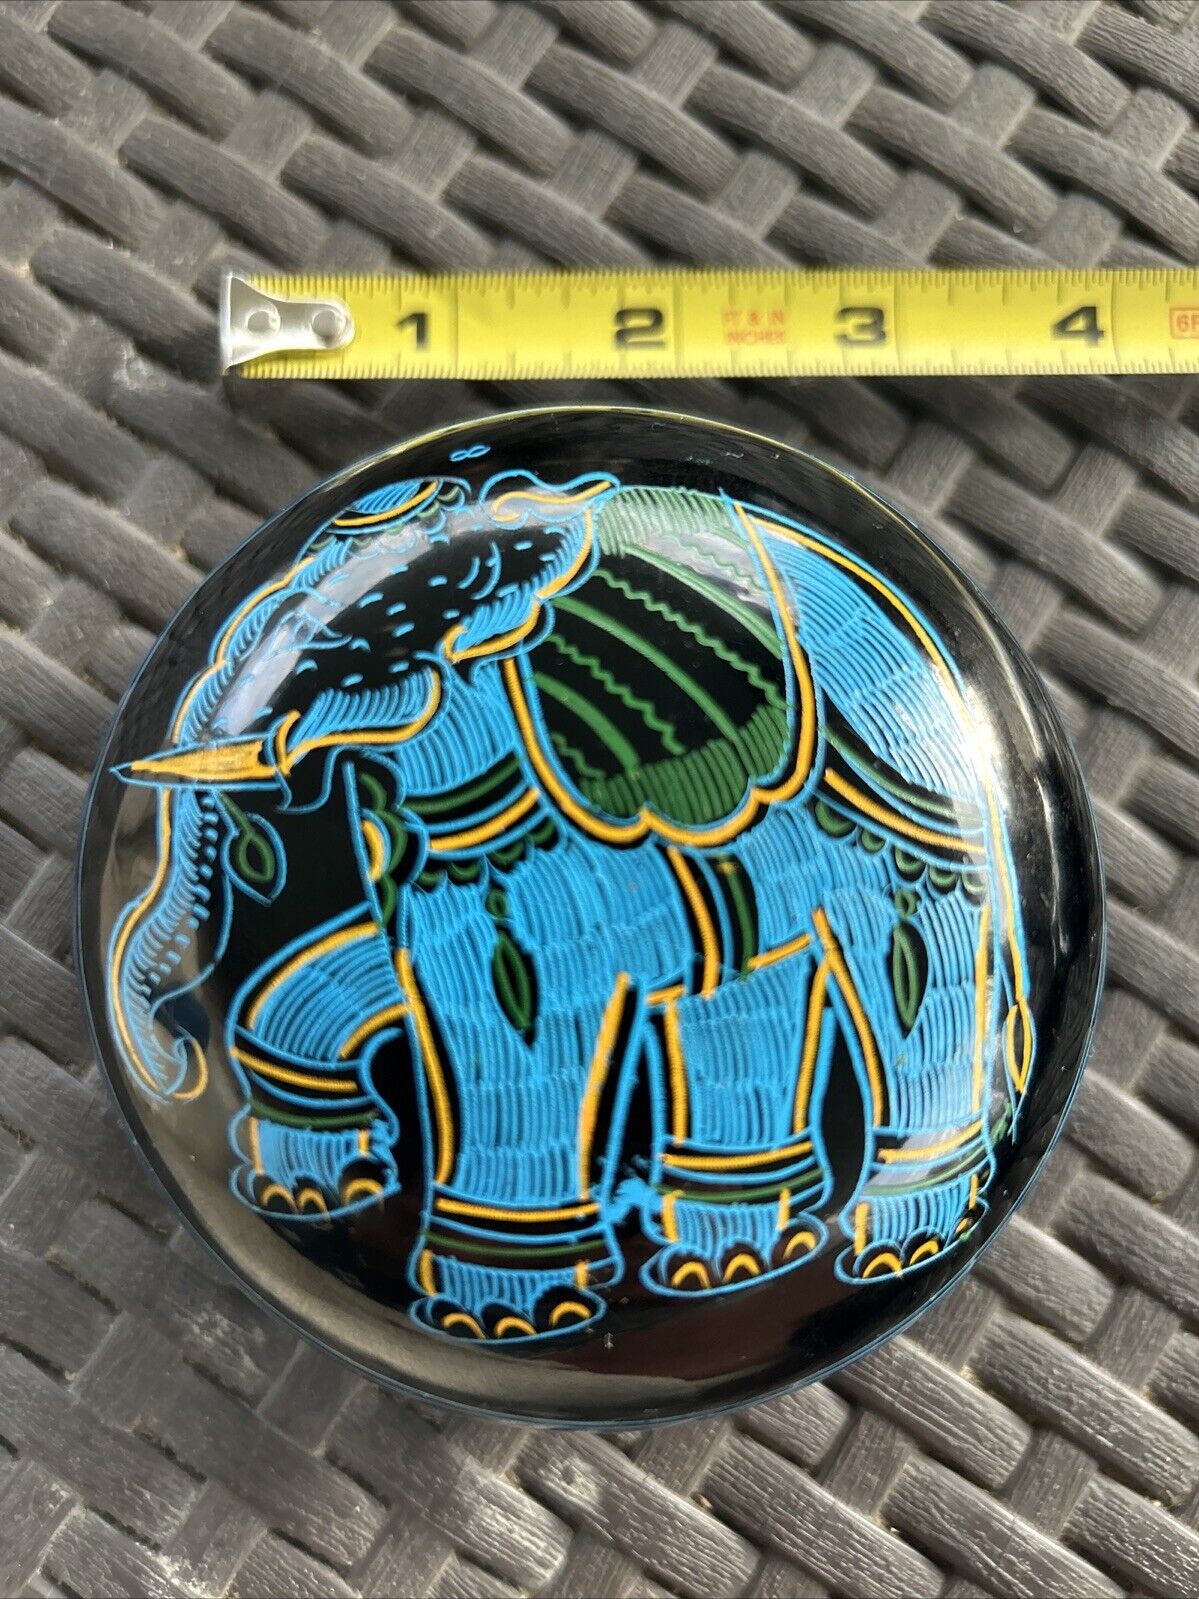 Elephant Themed trinket Box Within A Box. Black Lacquer Over Wood.  